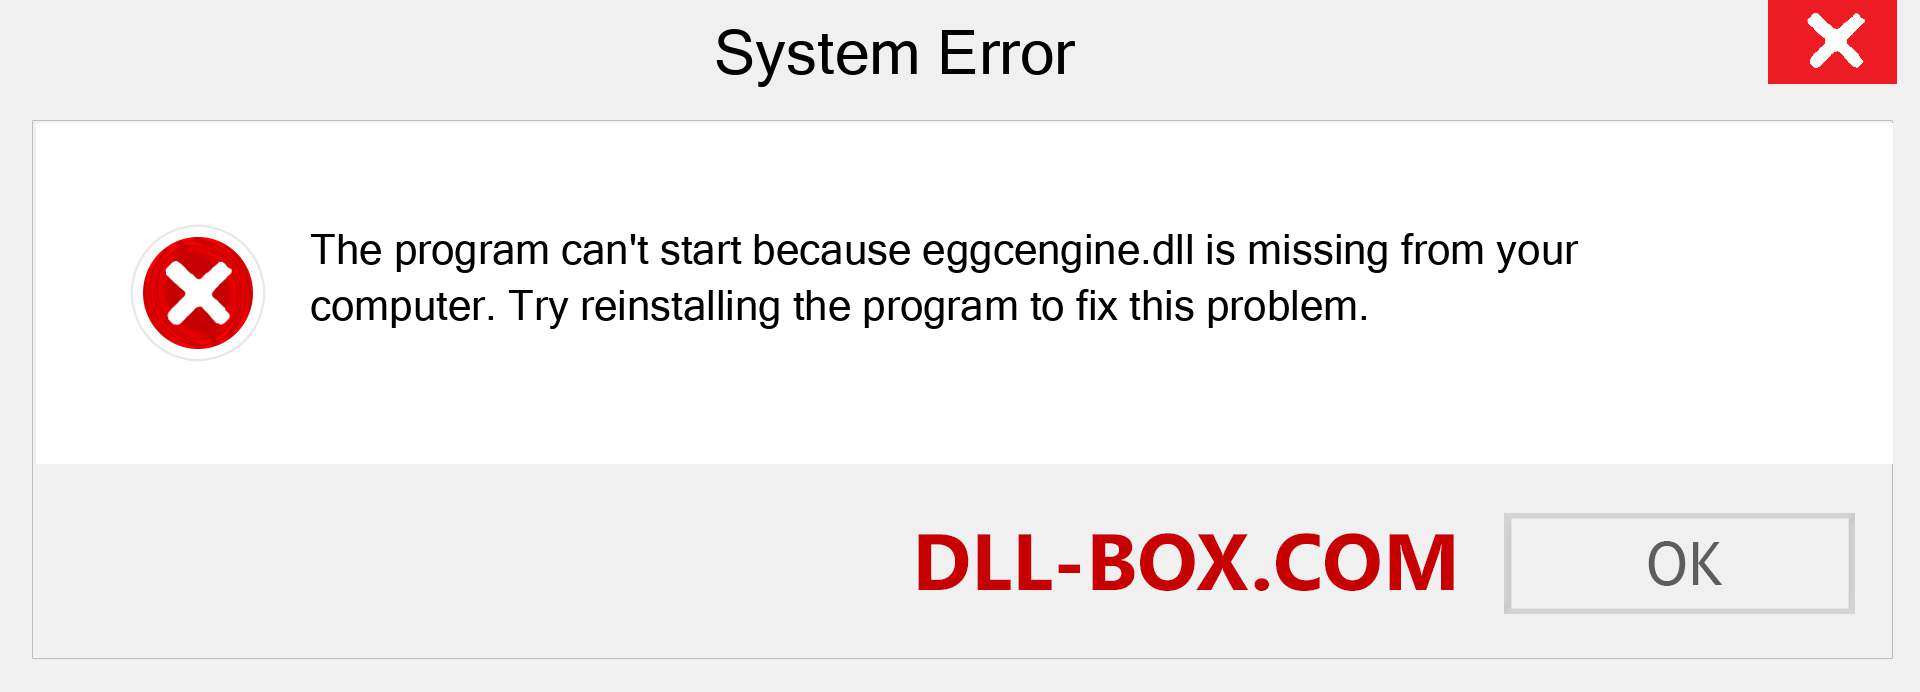  eggcengine.dll file is missing?. Download for Windows 7, 8, 10 - Fix  eggcengine dll Missing Error on Windows, photos, images